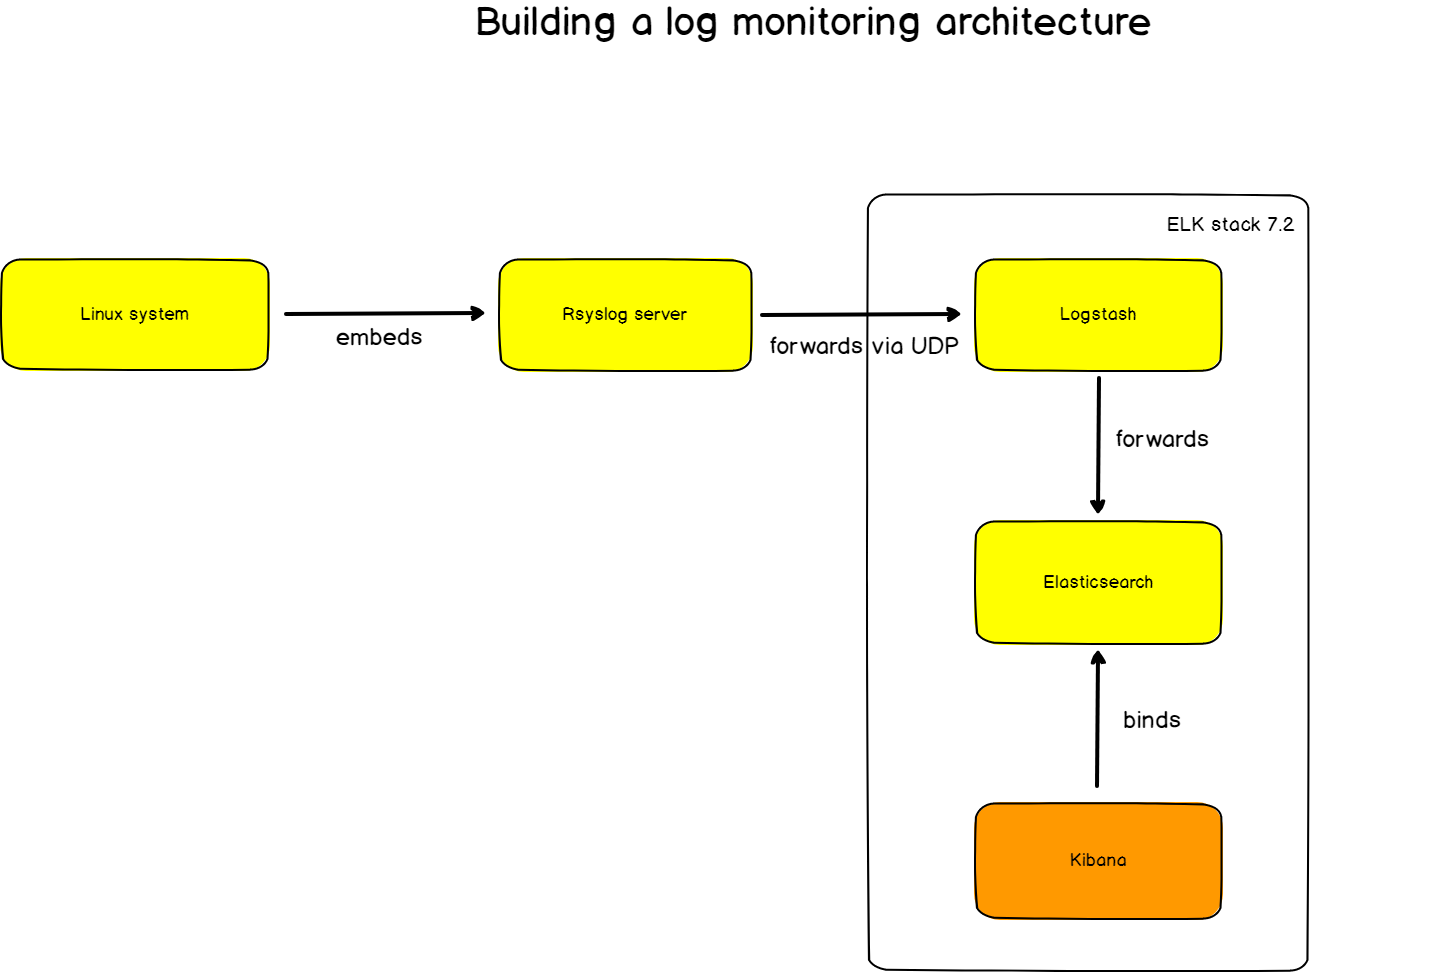 wechat/articles/2020/07/2020-07-01-monitoring-linux-logs-with-kibana-and-rsyslog/architecture.png